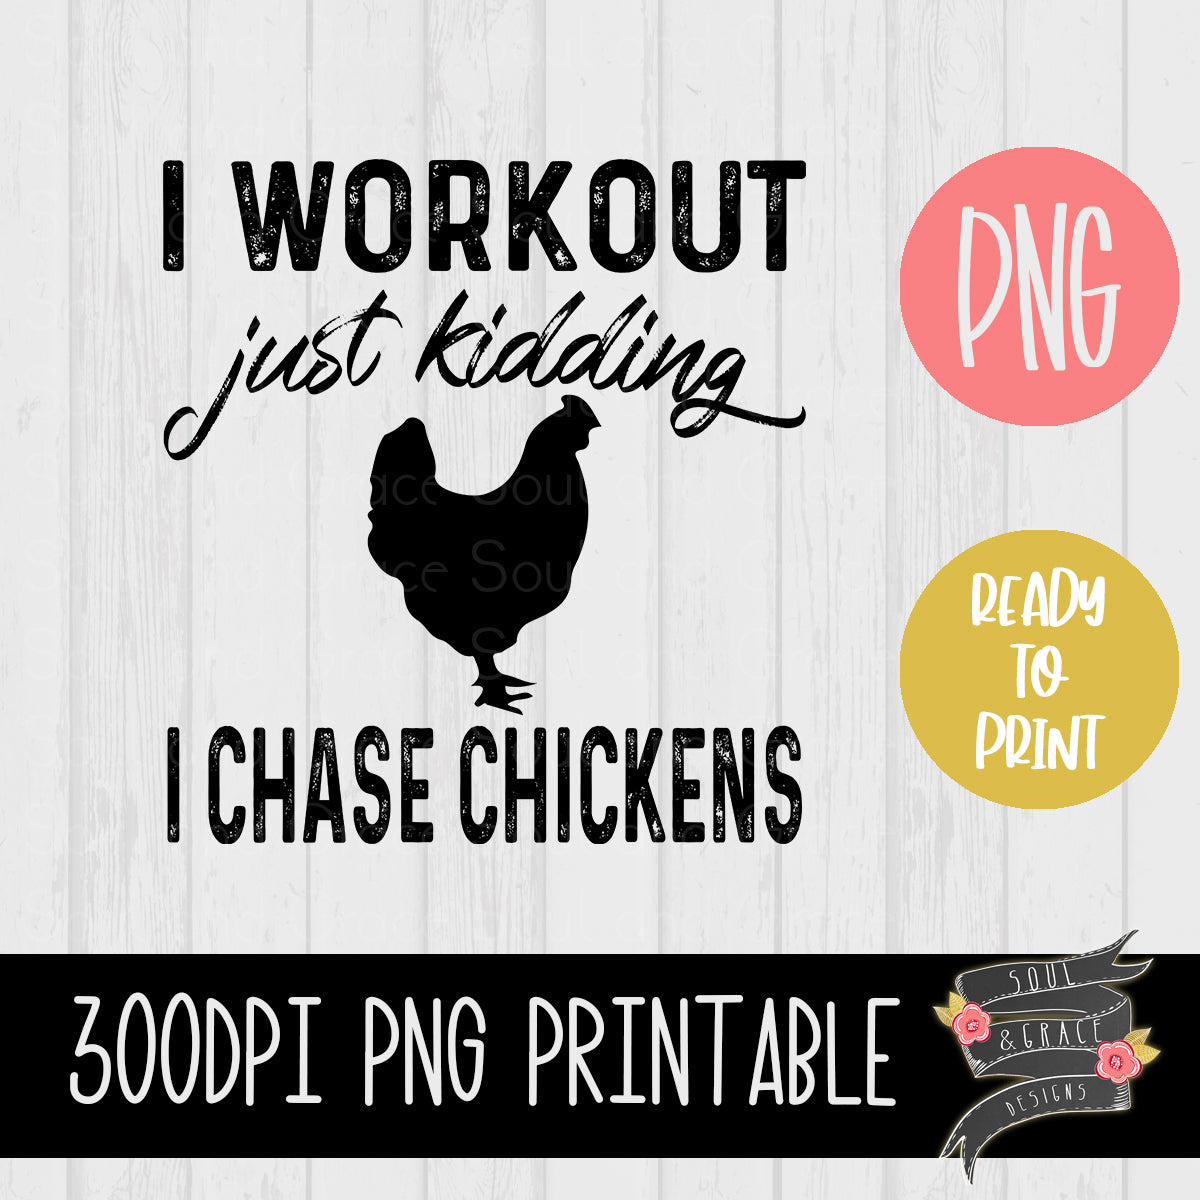 I Workout Just Kidding I Chase CHICKENS